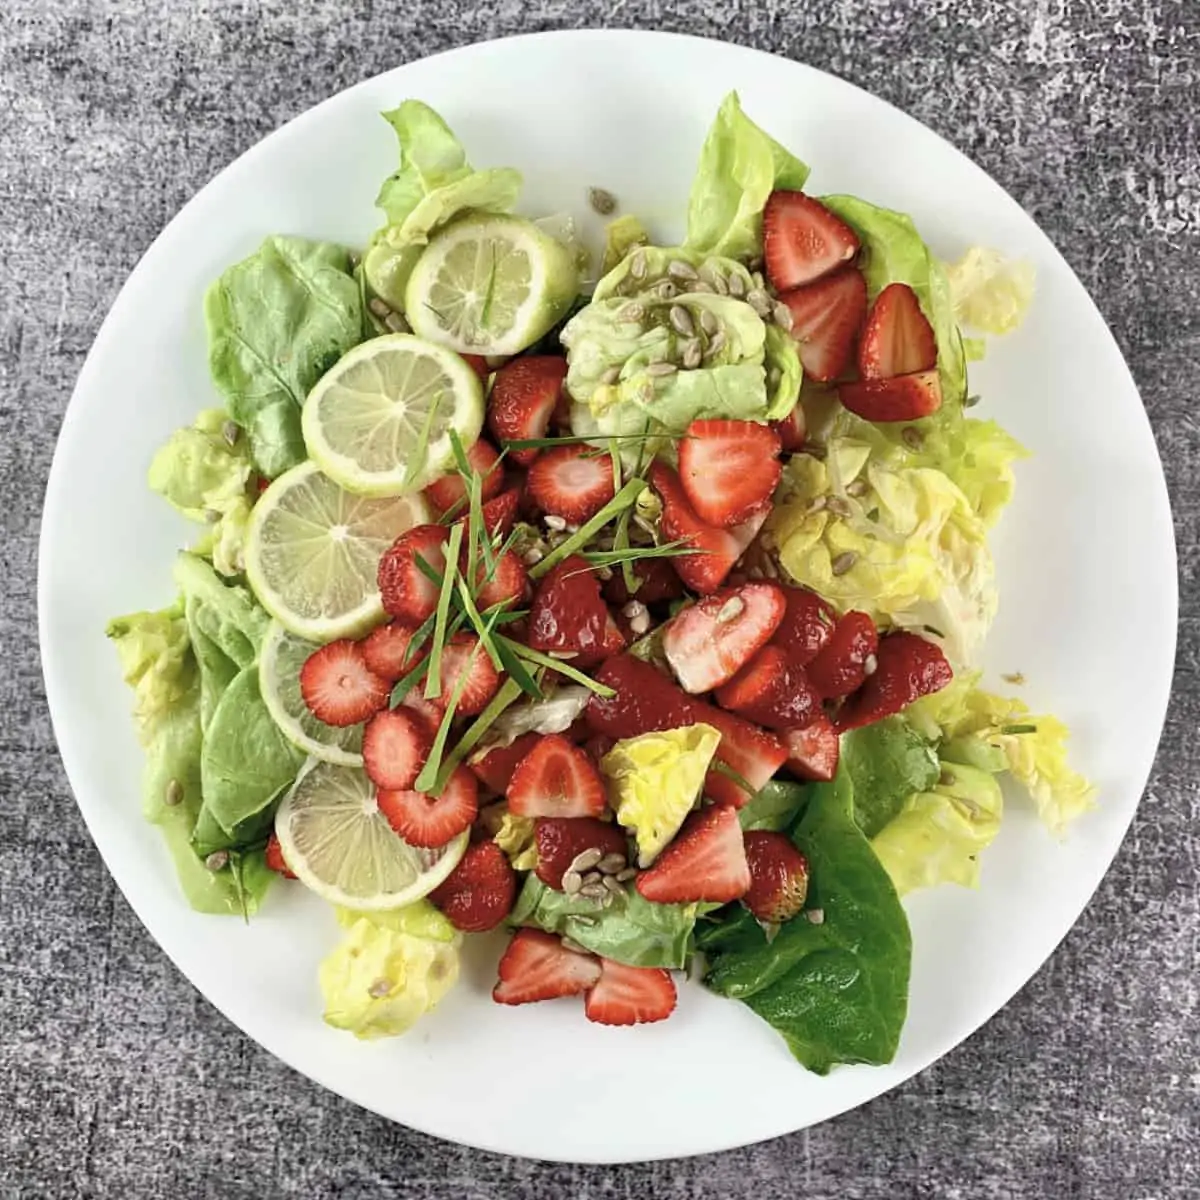 Lettuce salad with strawberries in a white salad platter with lime garnish, square view.